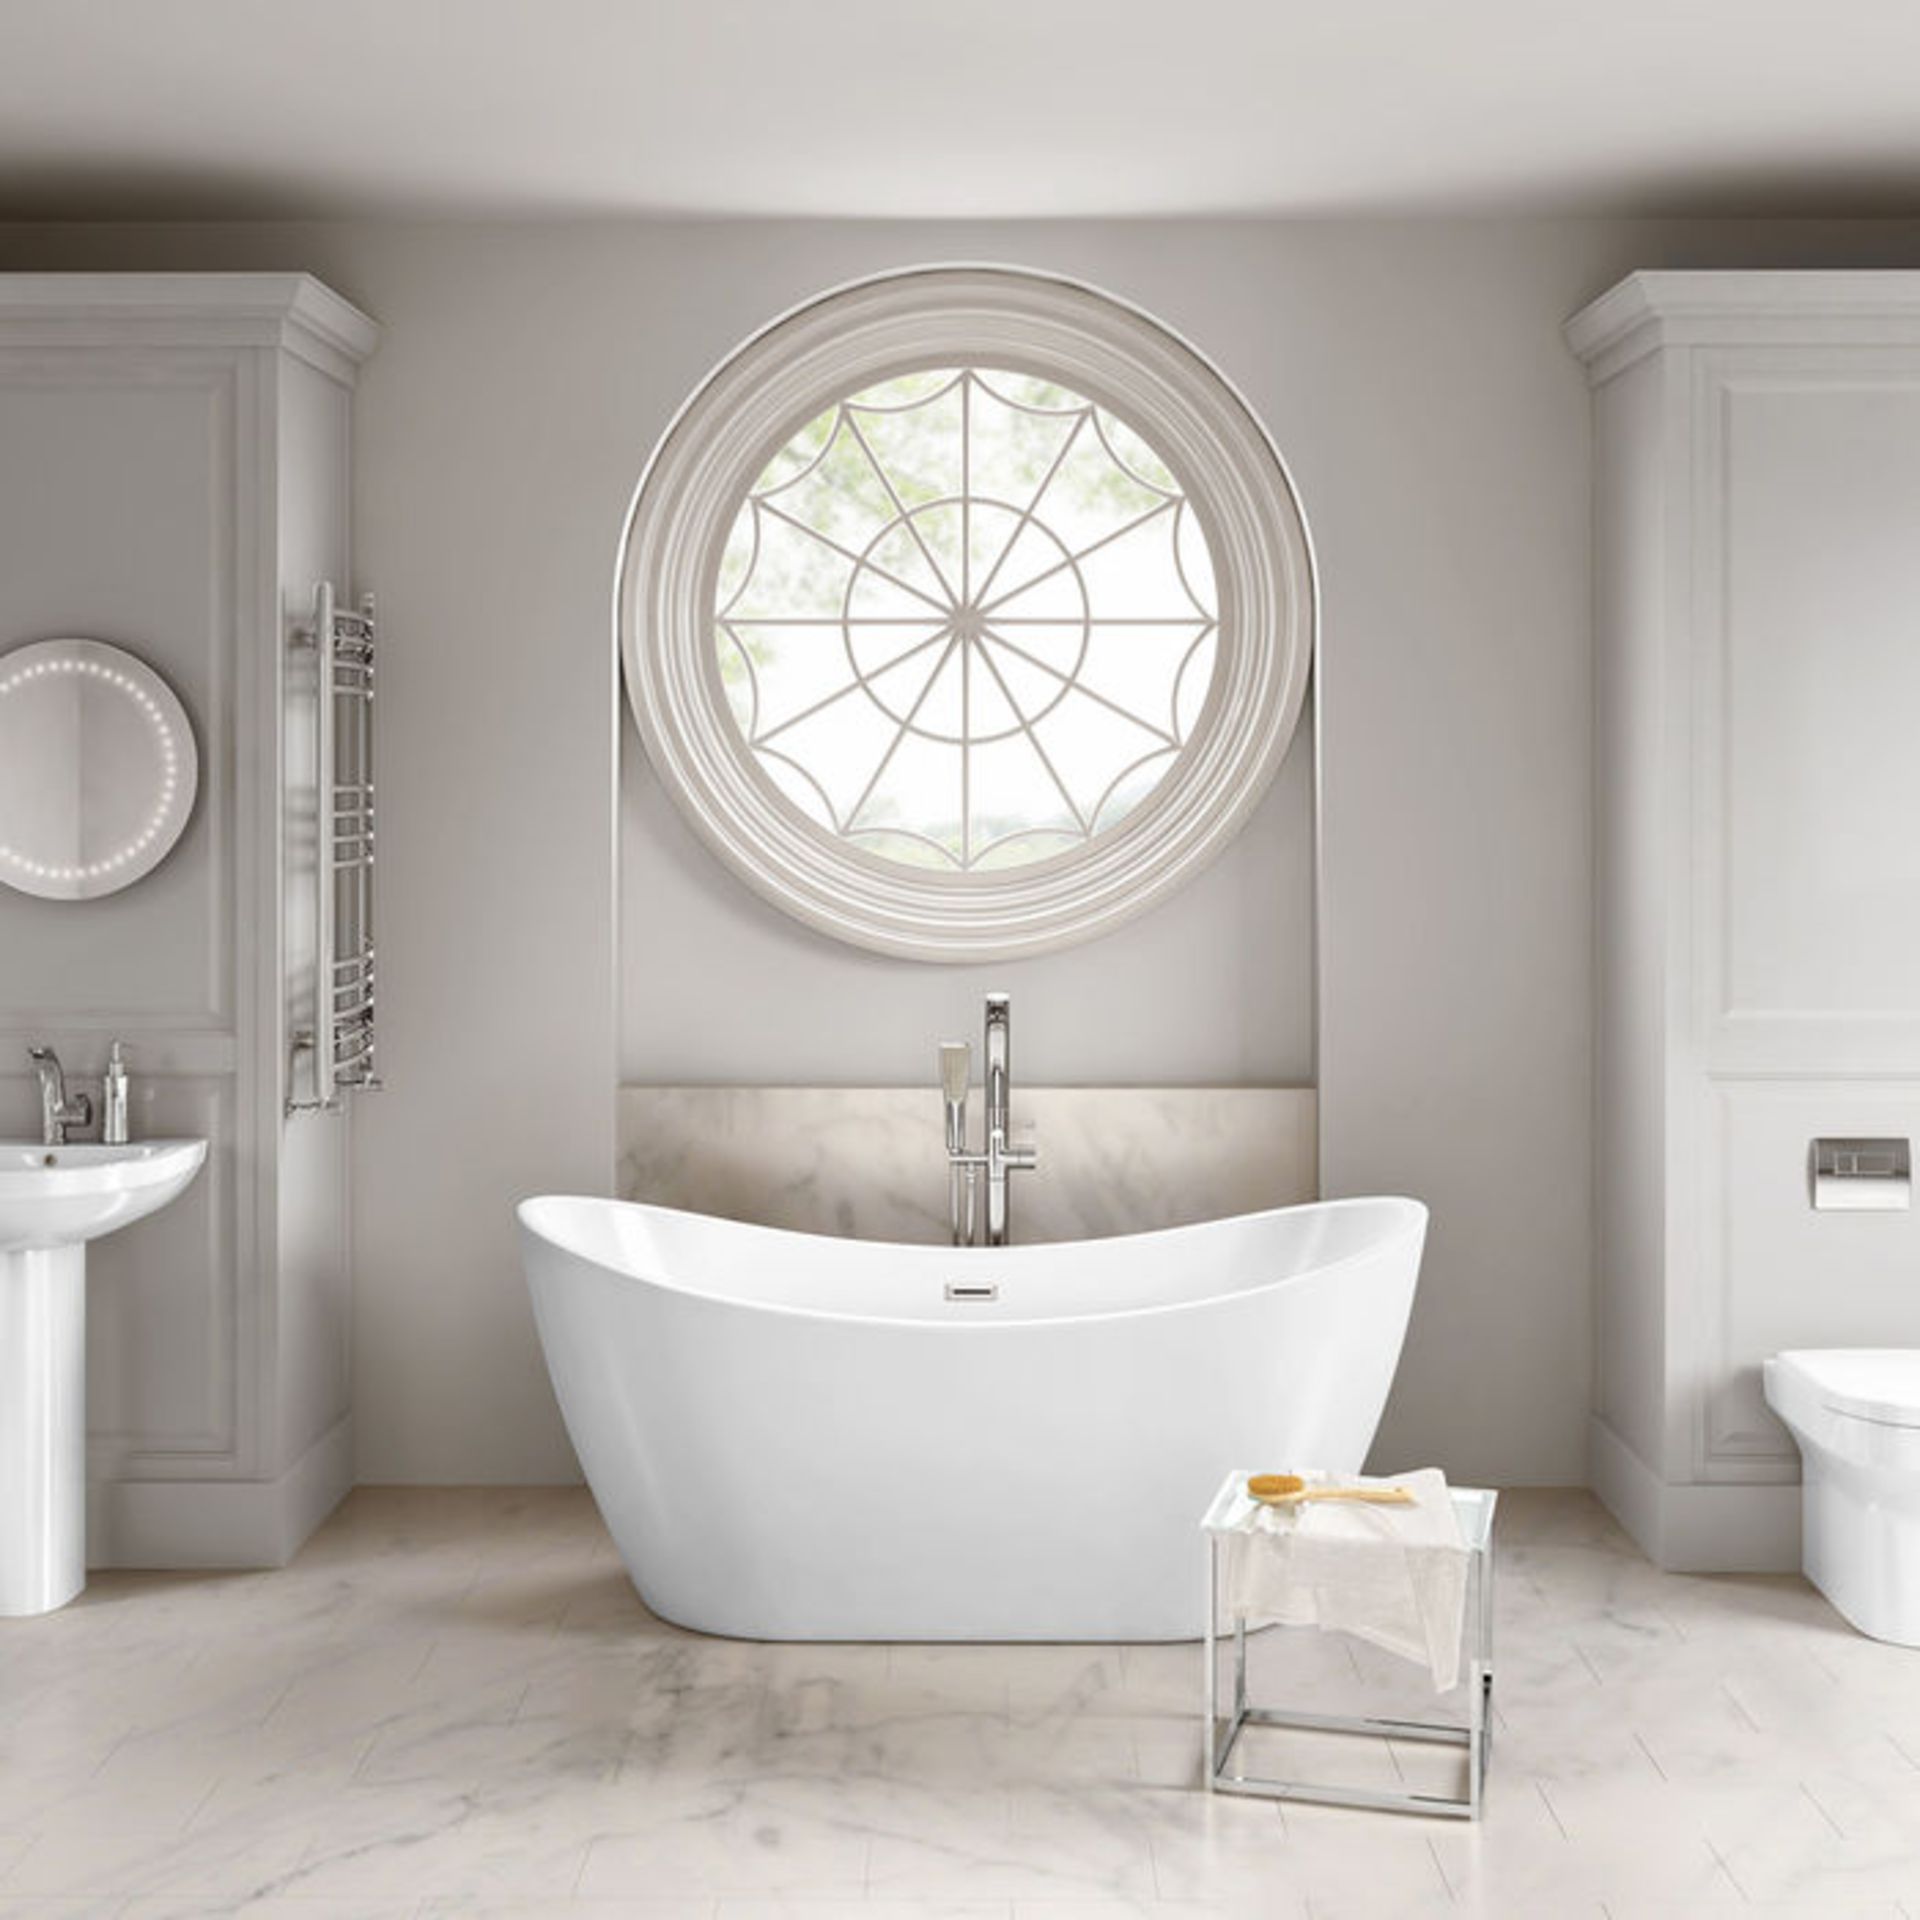 New (S1) 1700 mm x 780 mm Caitlyn Freestanding Bath. Visually Simplistic To Suit Any Bathroom Int... - Image 2 of 4